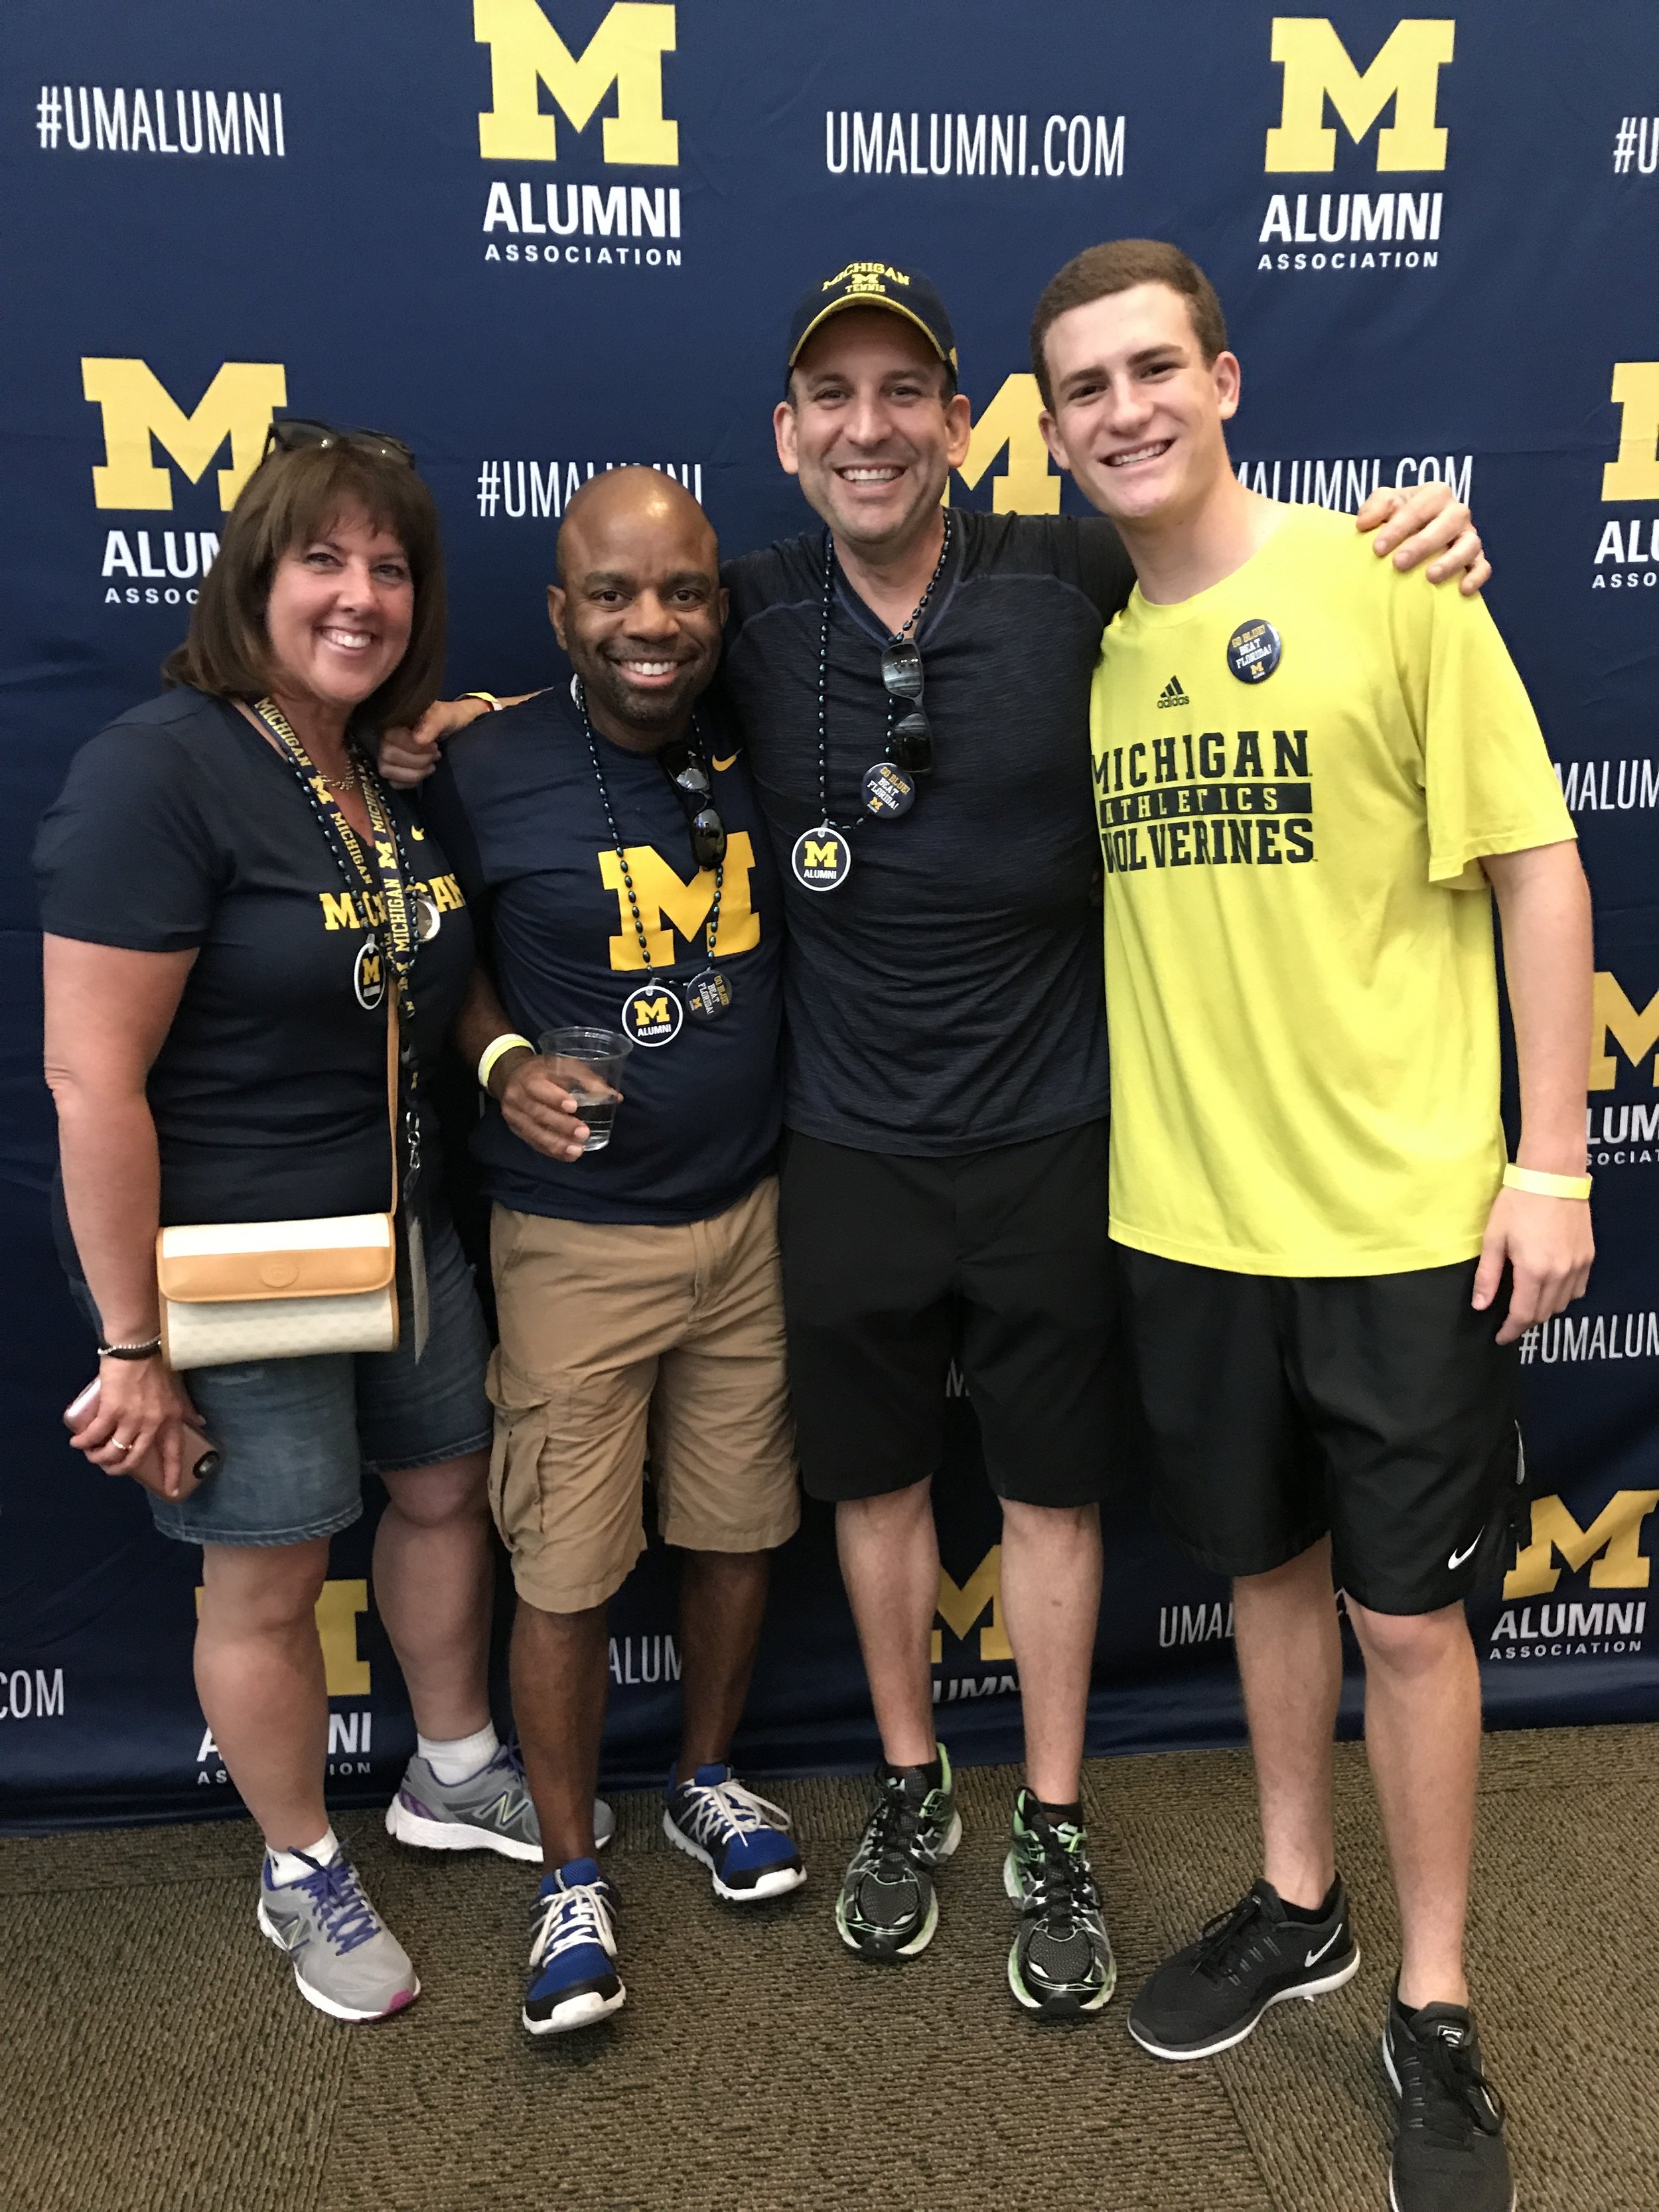 Go Blue! Awesome time with new friends! This is the start of a survivor network that will span the globe.